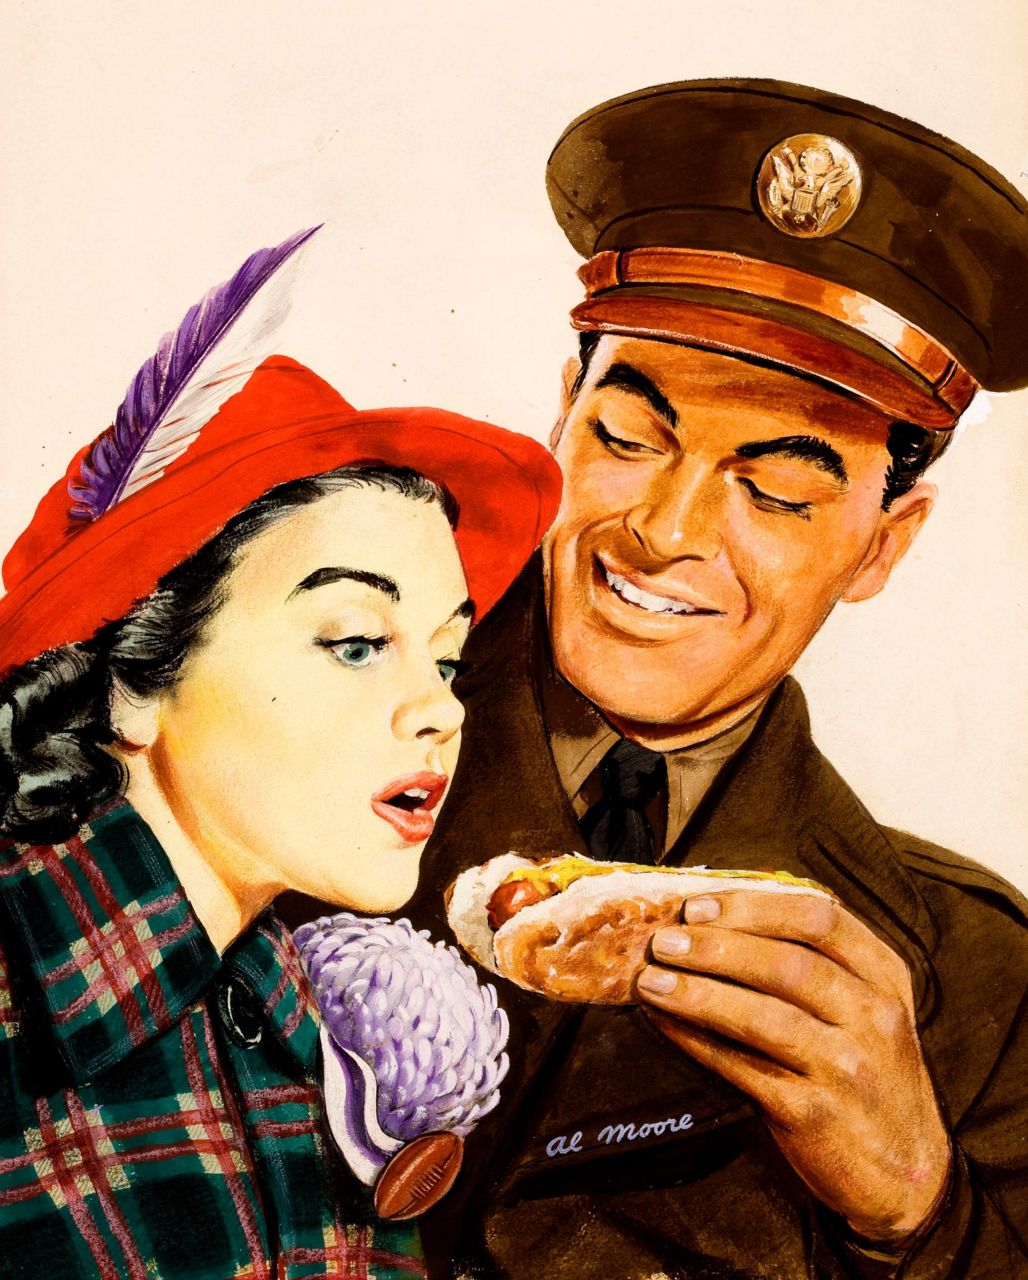 A Hot Dog For You by Al Moore, 1942